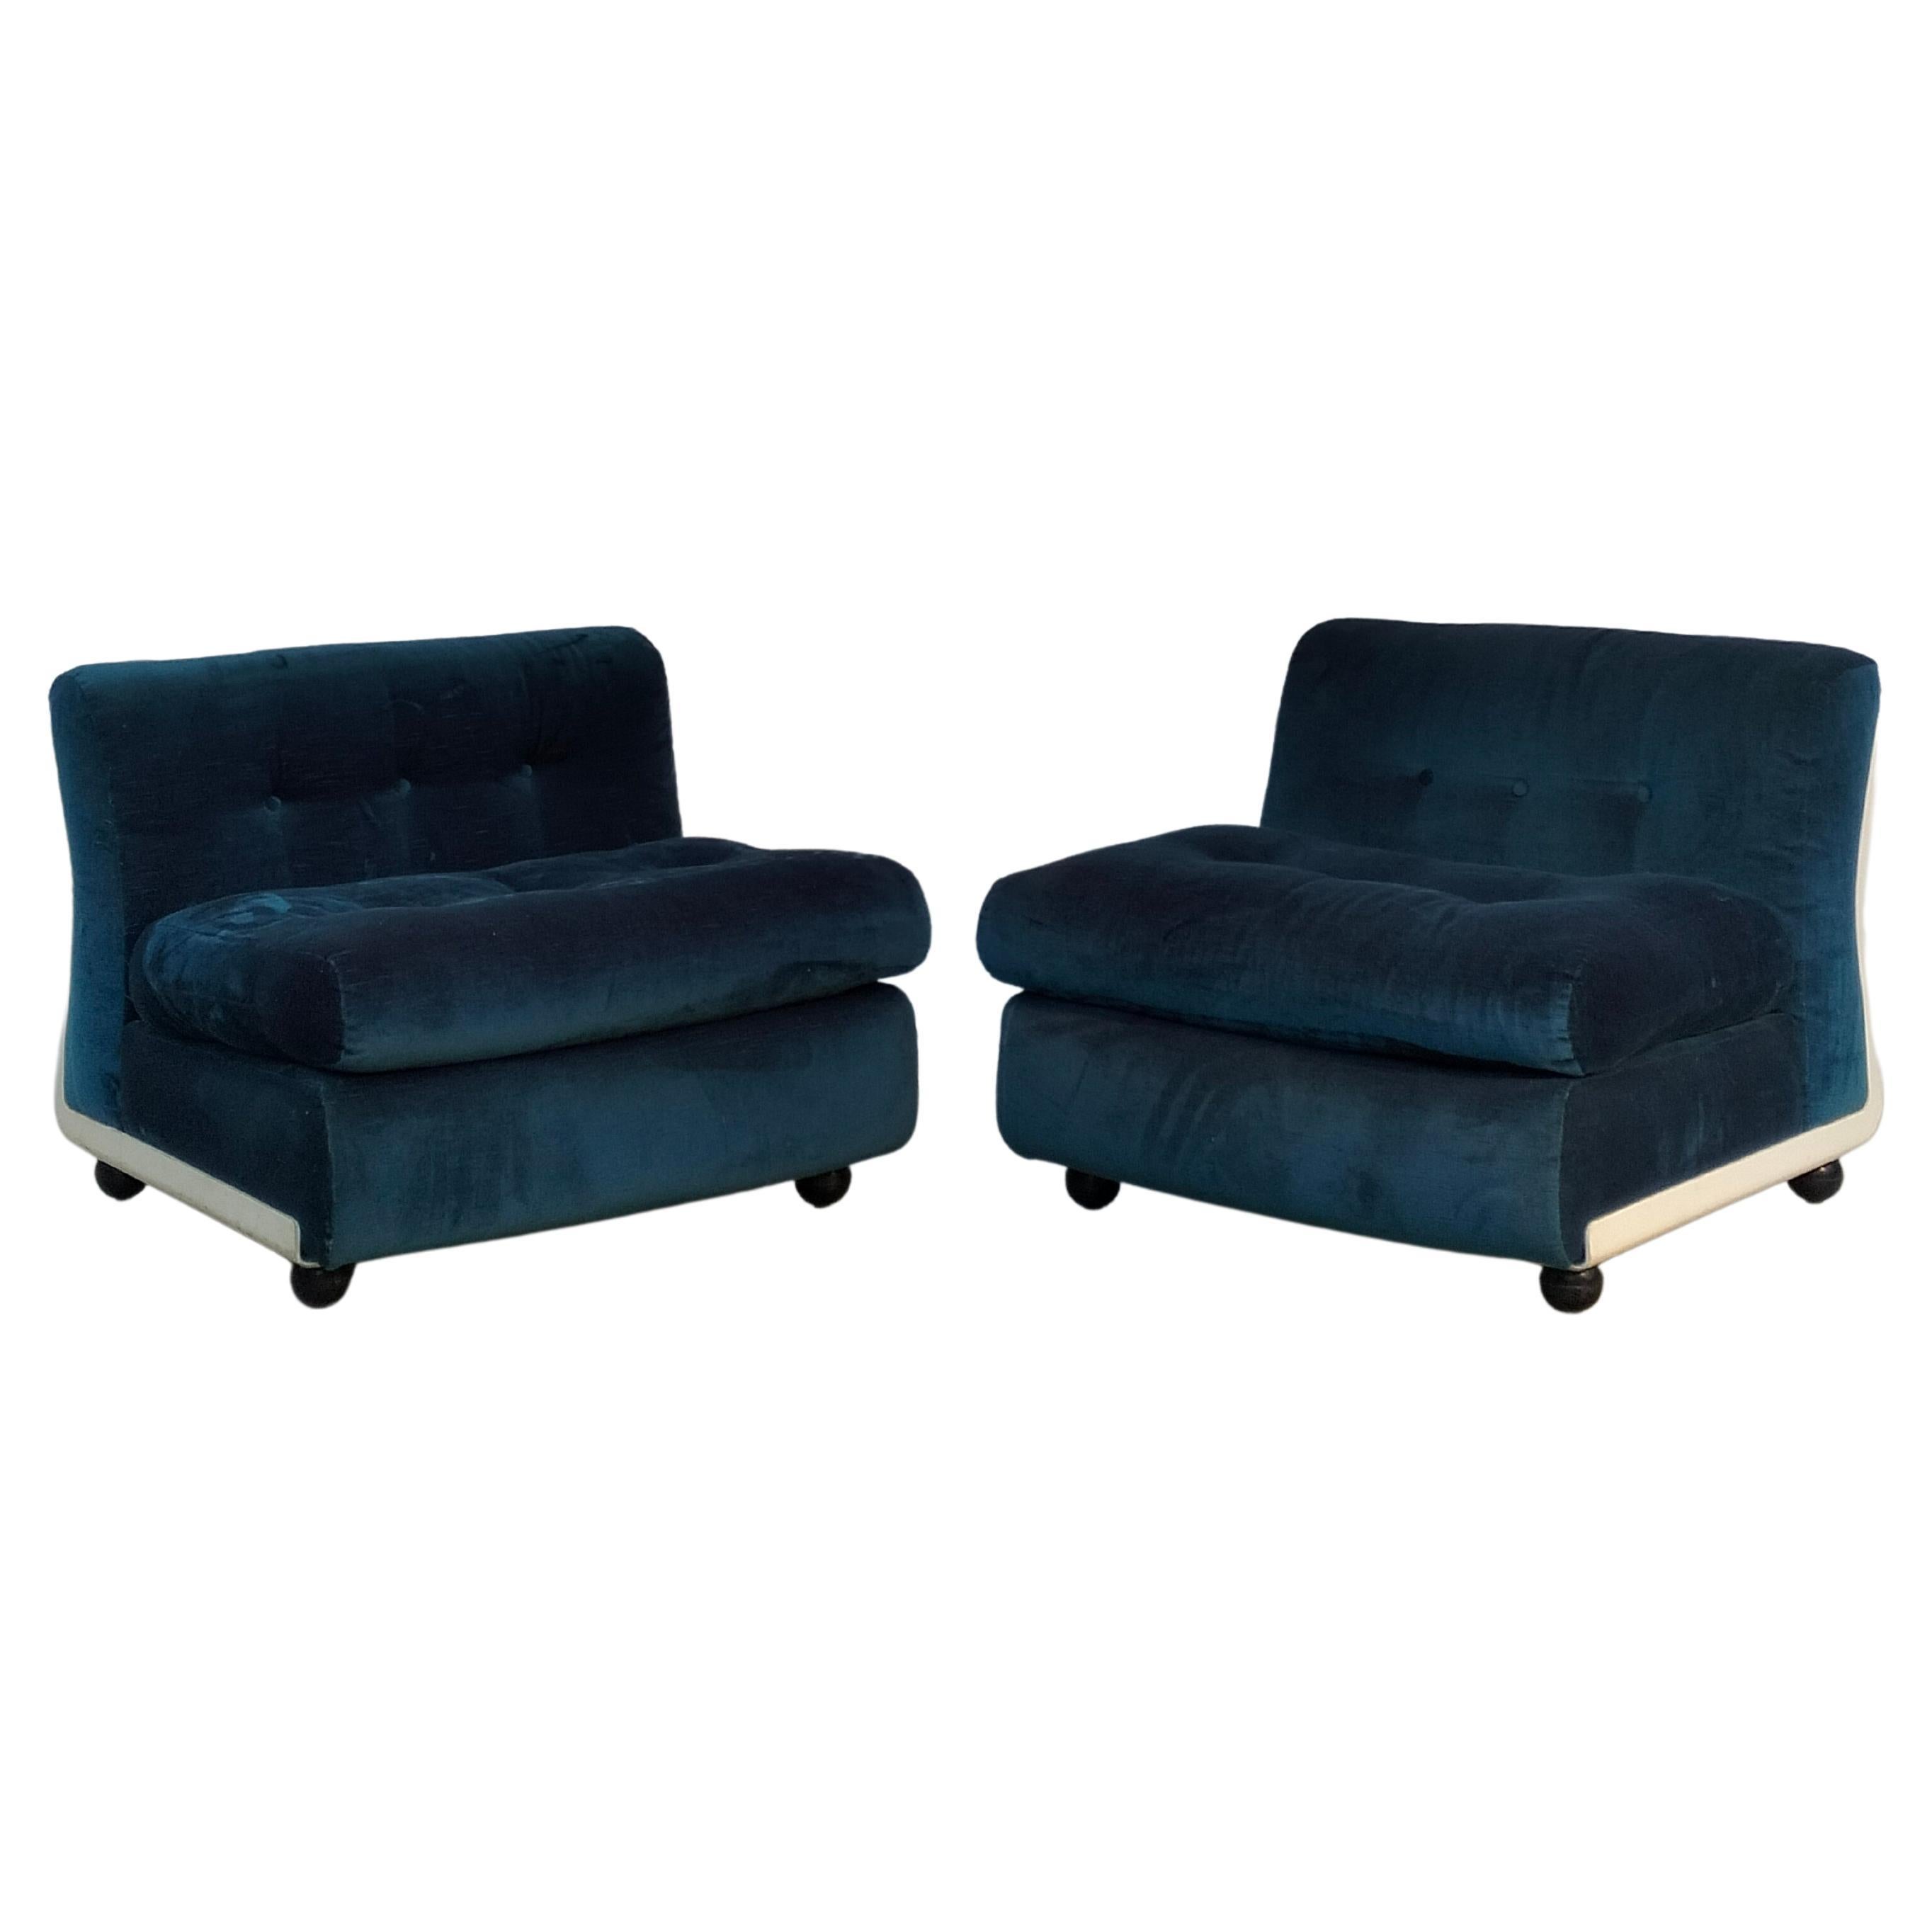 Set of 2 Blue Amanta Lounge Chairs by Mario Bellini for C&B Italia, 1970s For Sale